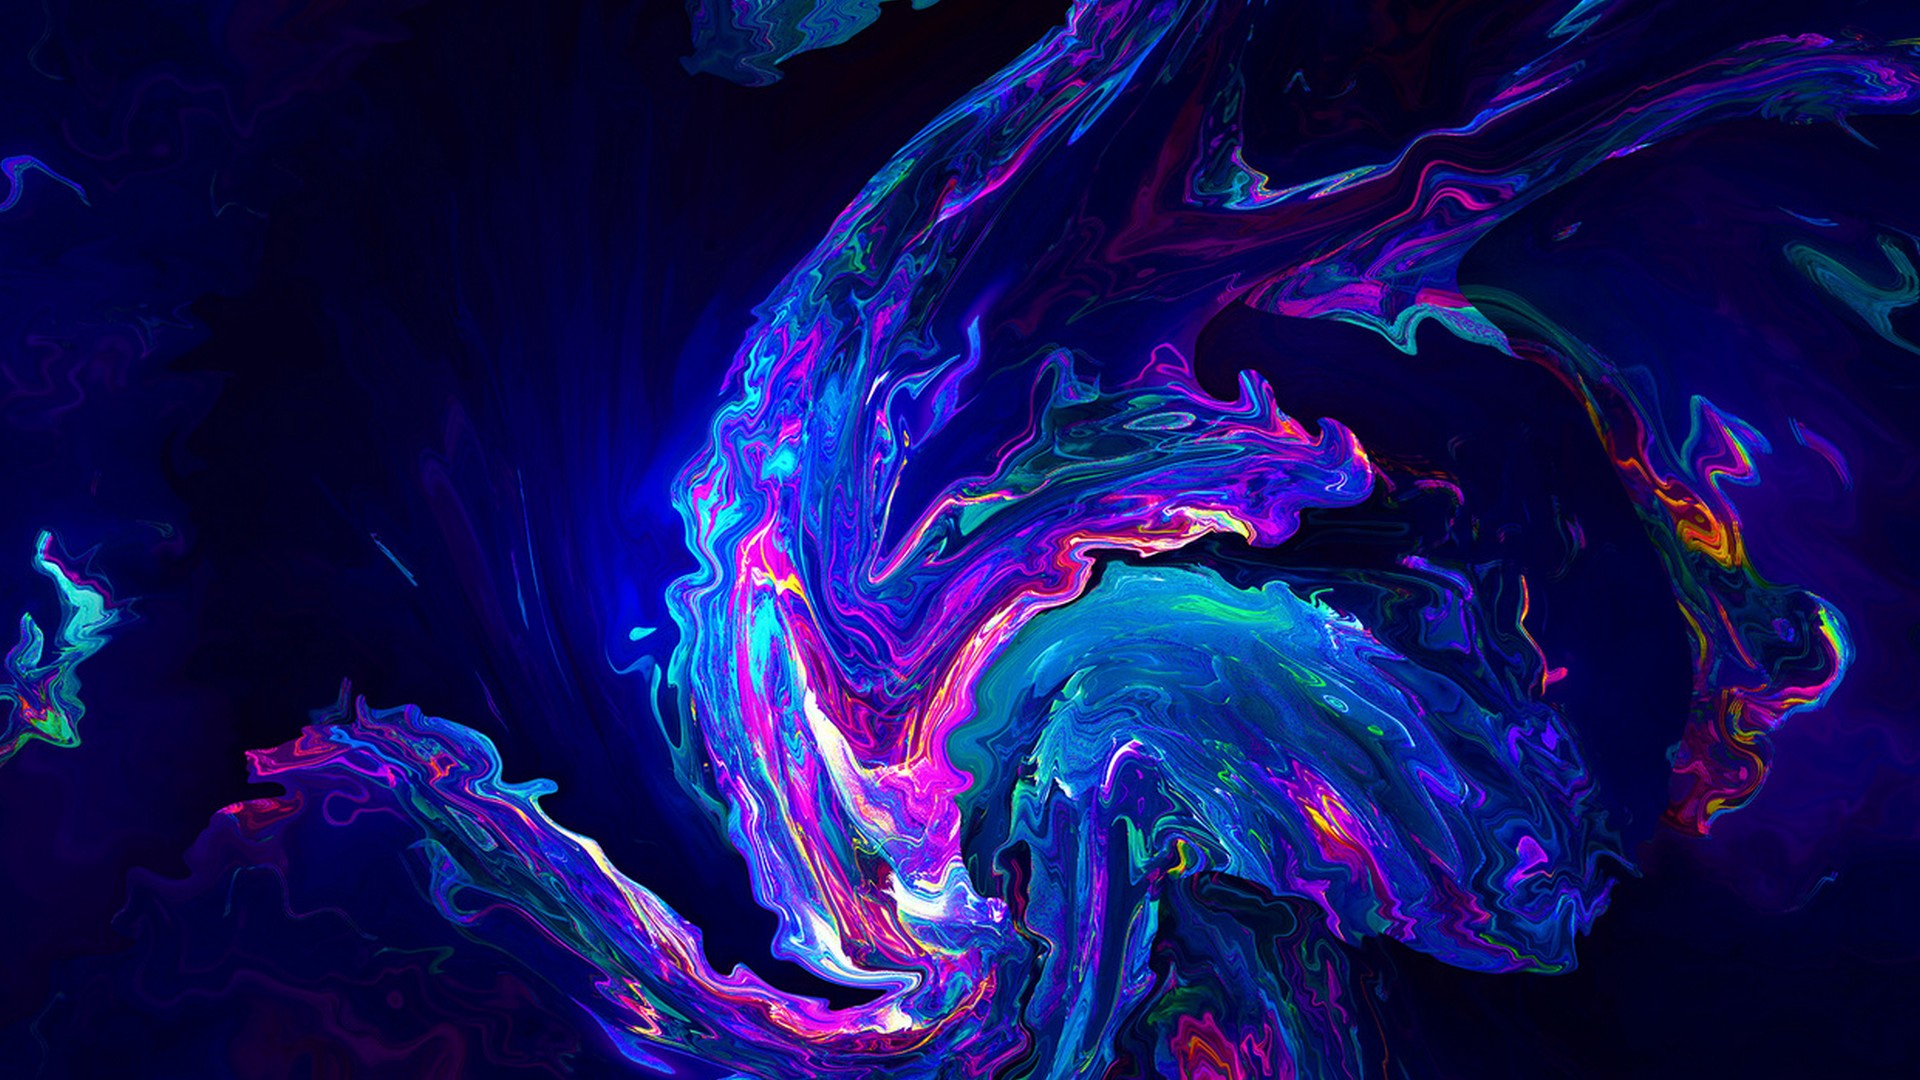 Best Blue Neon Wallpaper HD with high-resolution 1920x1080 pixel. You can use this wallpaper for your Desktop Computer Backgrounds, Mac Wallpapers, Android Lock screen or iPhone Screensavers and another smartphone device